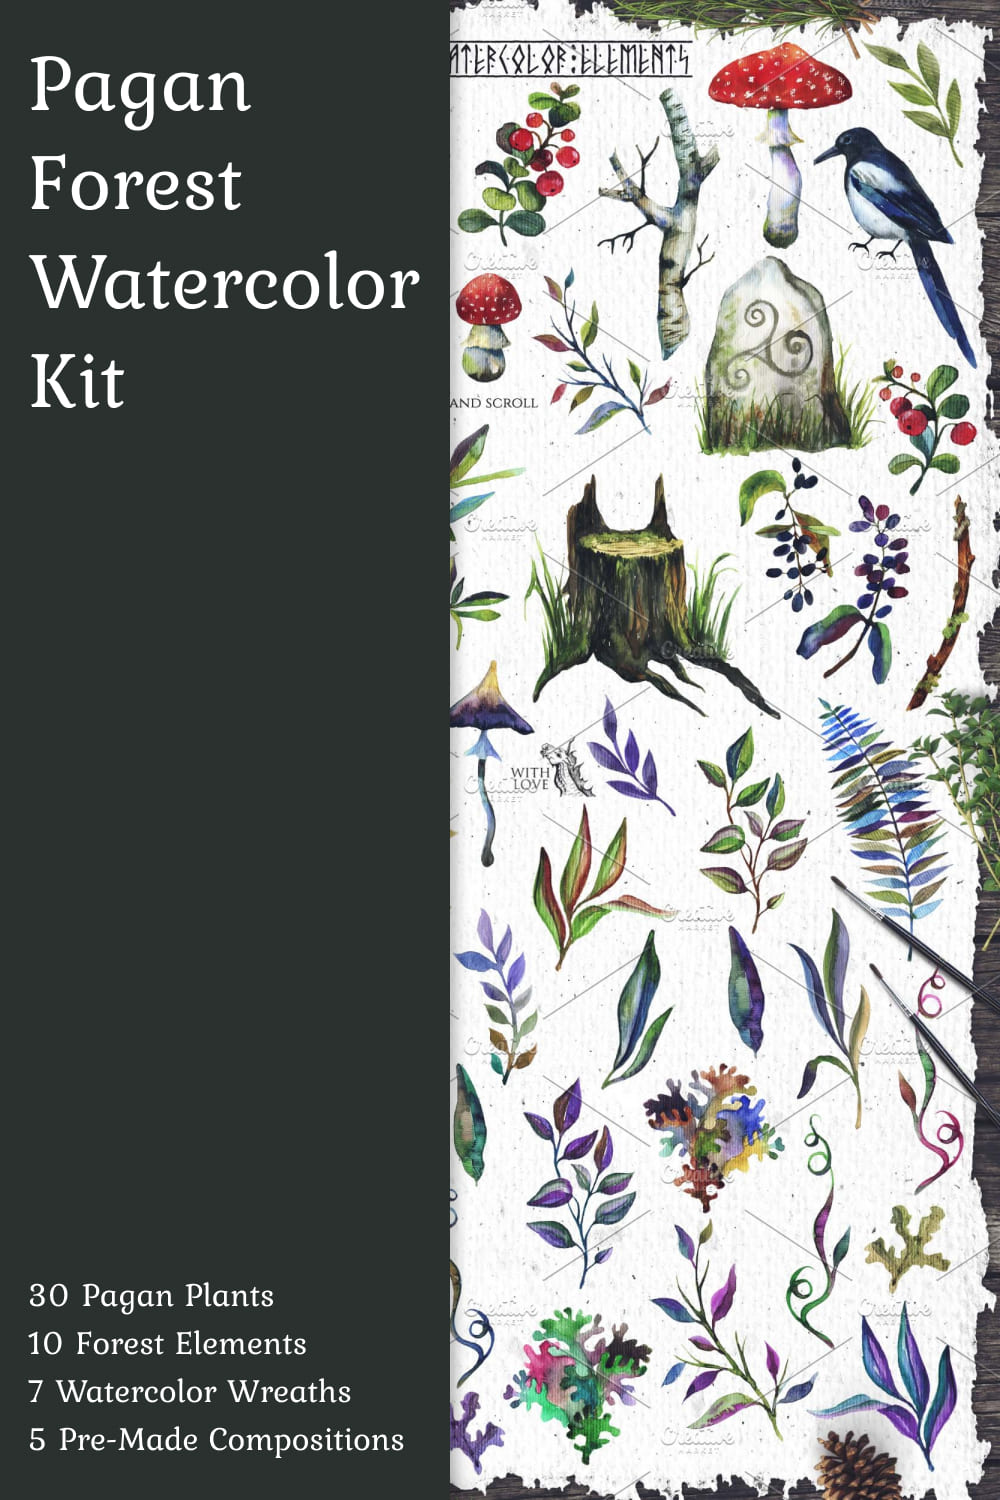 Pagan forest watercolor kit - pinterest image preview.